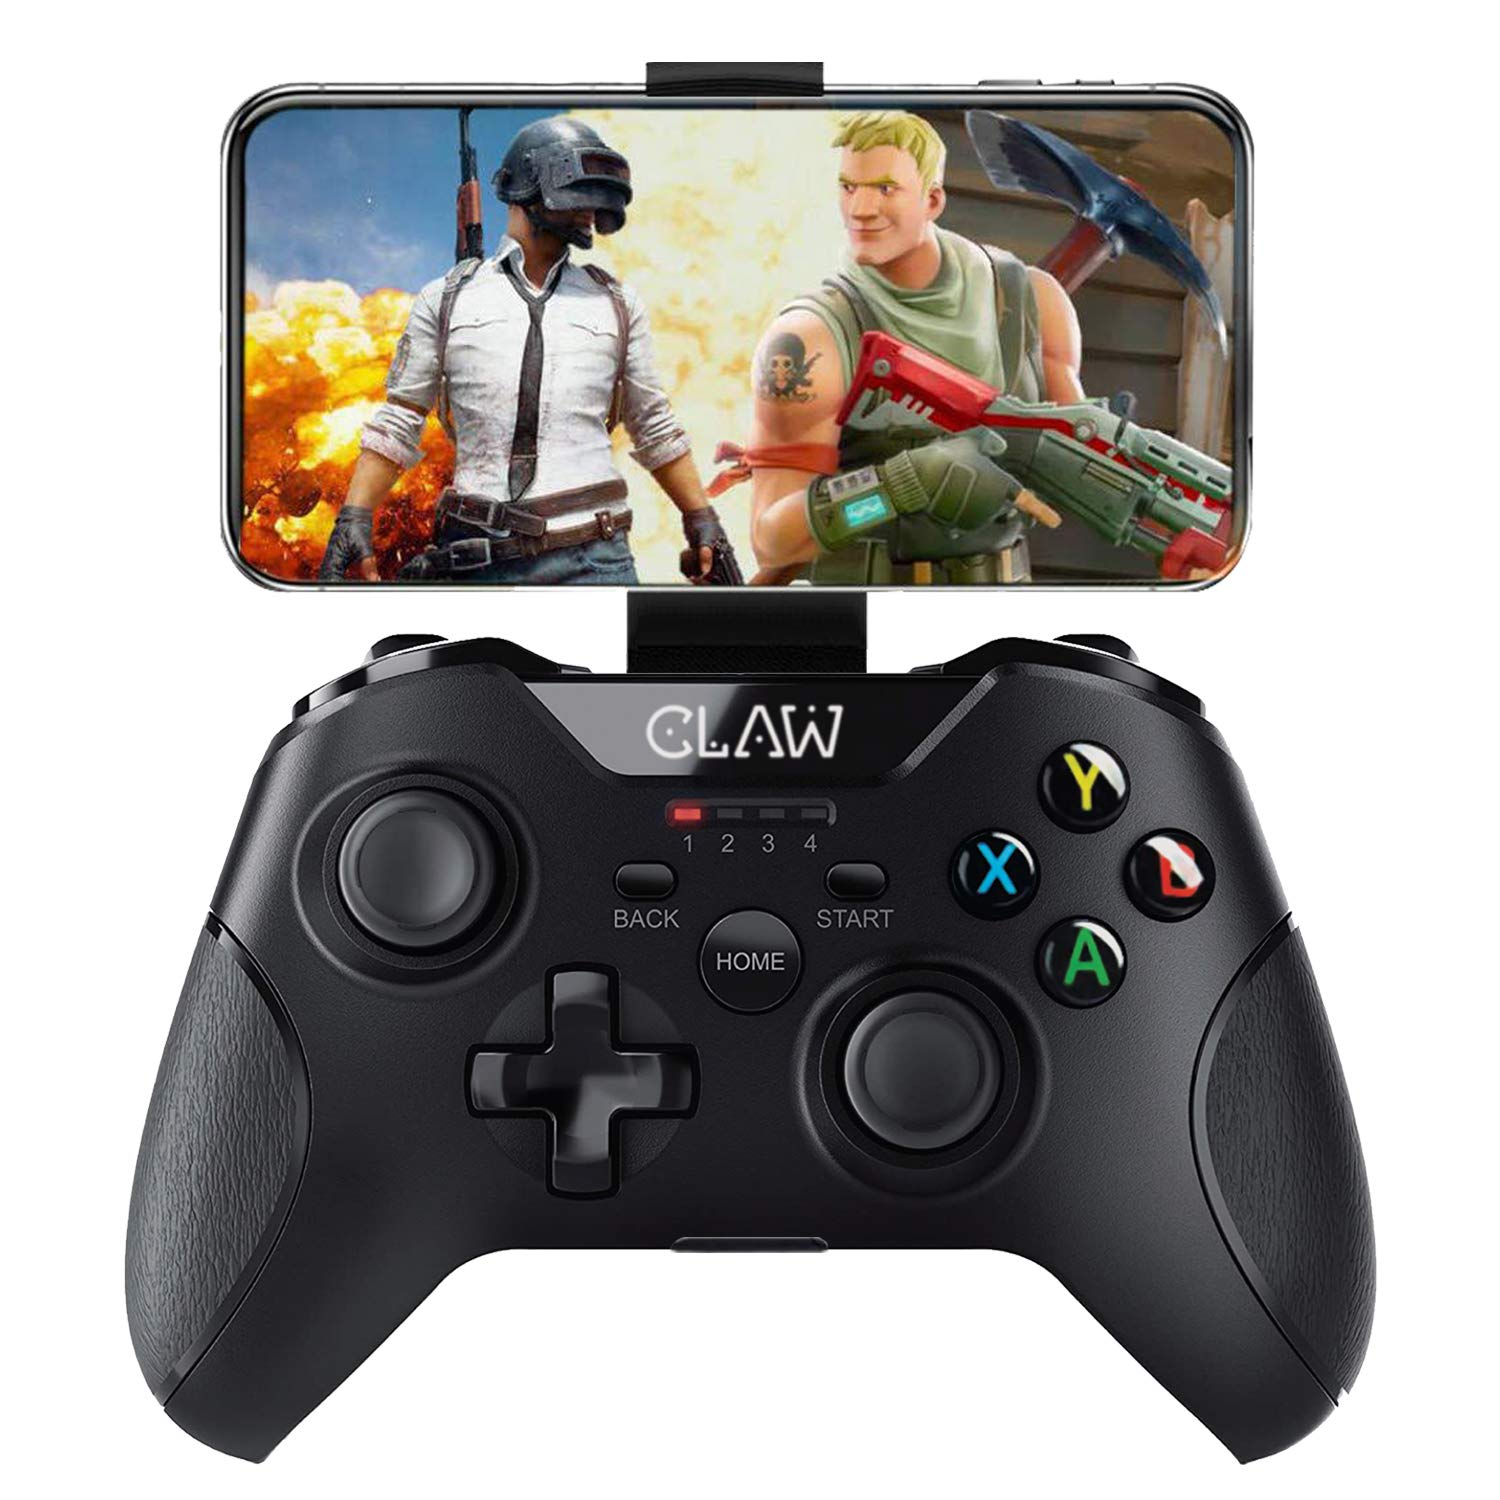 CLAW Shoot Bluetooth Mobile Gamepad (Upgraded 2022 version) (Use Code Origin5 to Get 5% DIscount)